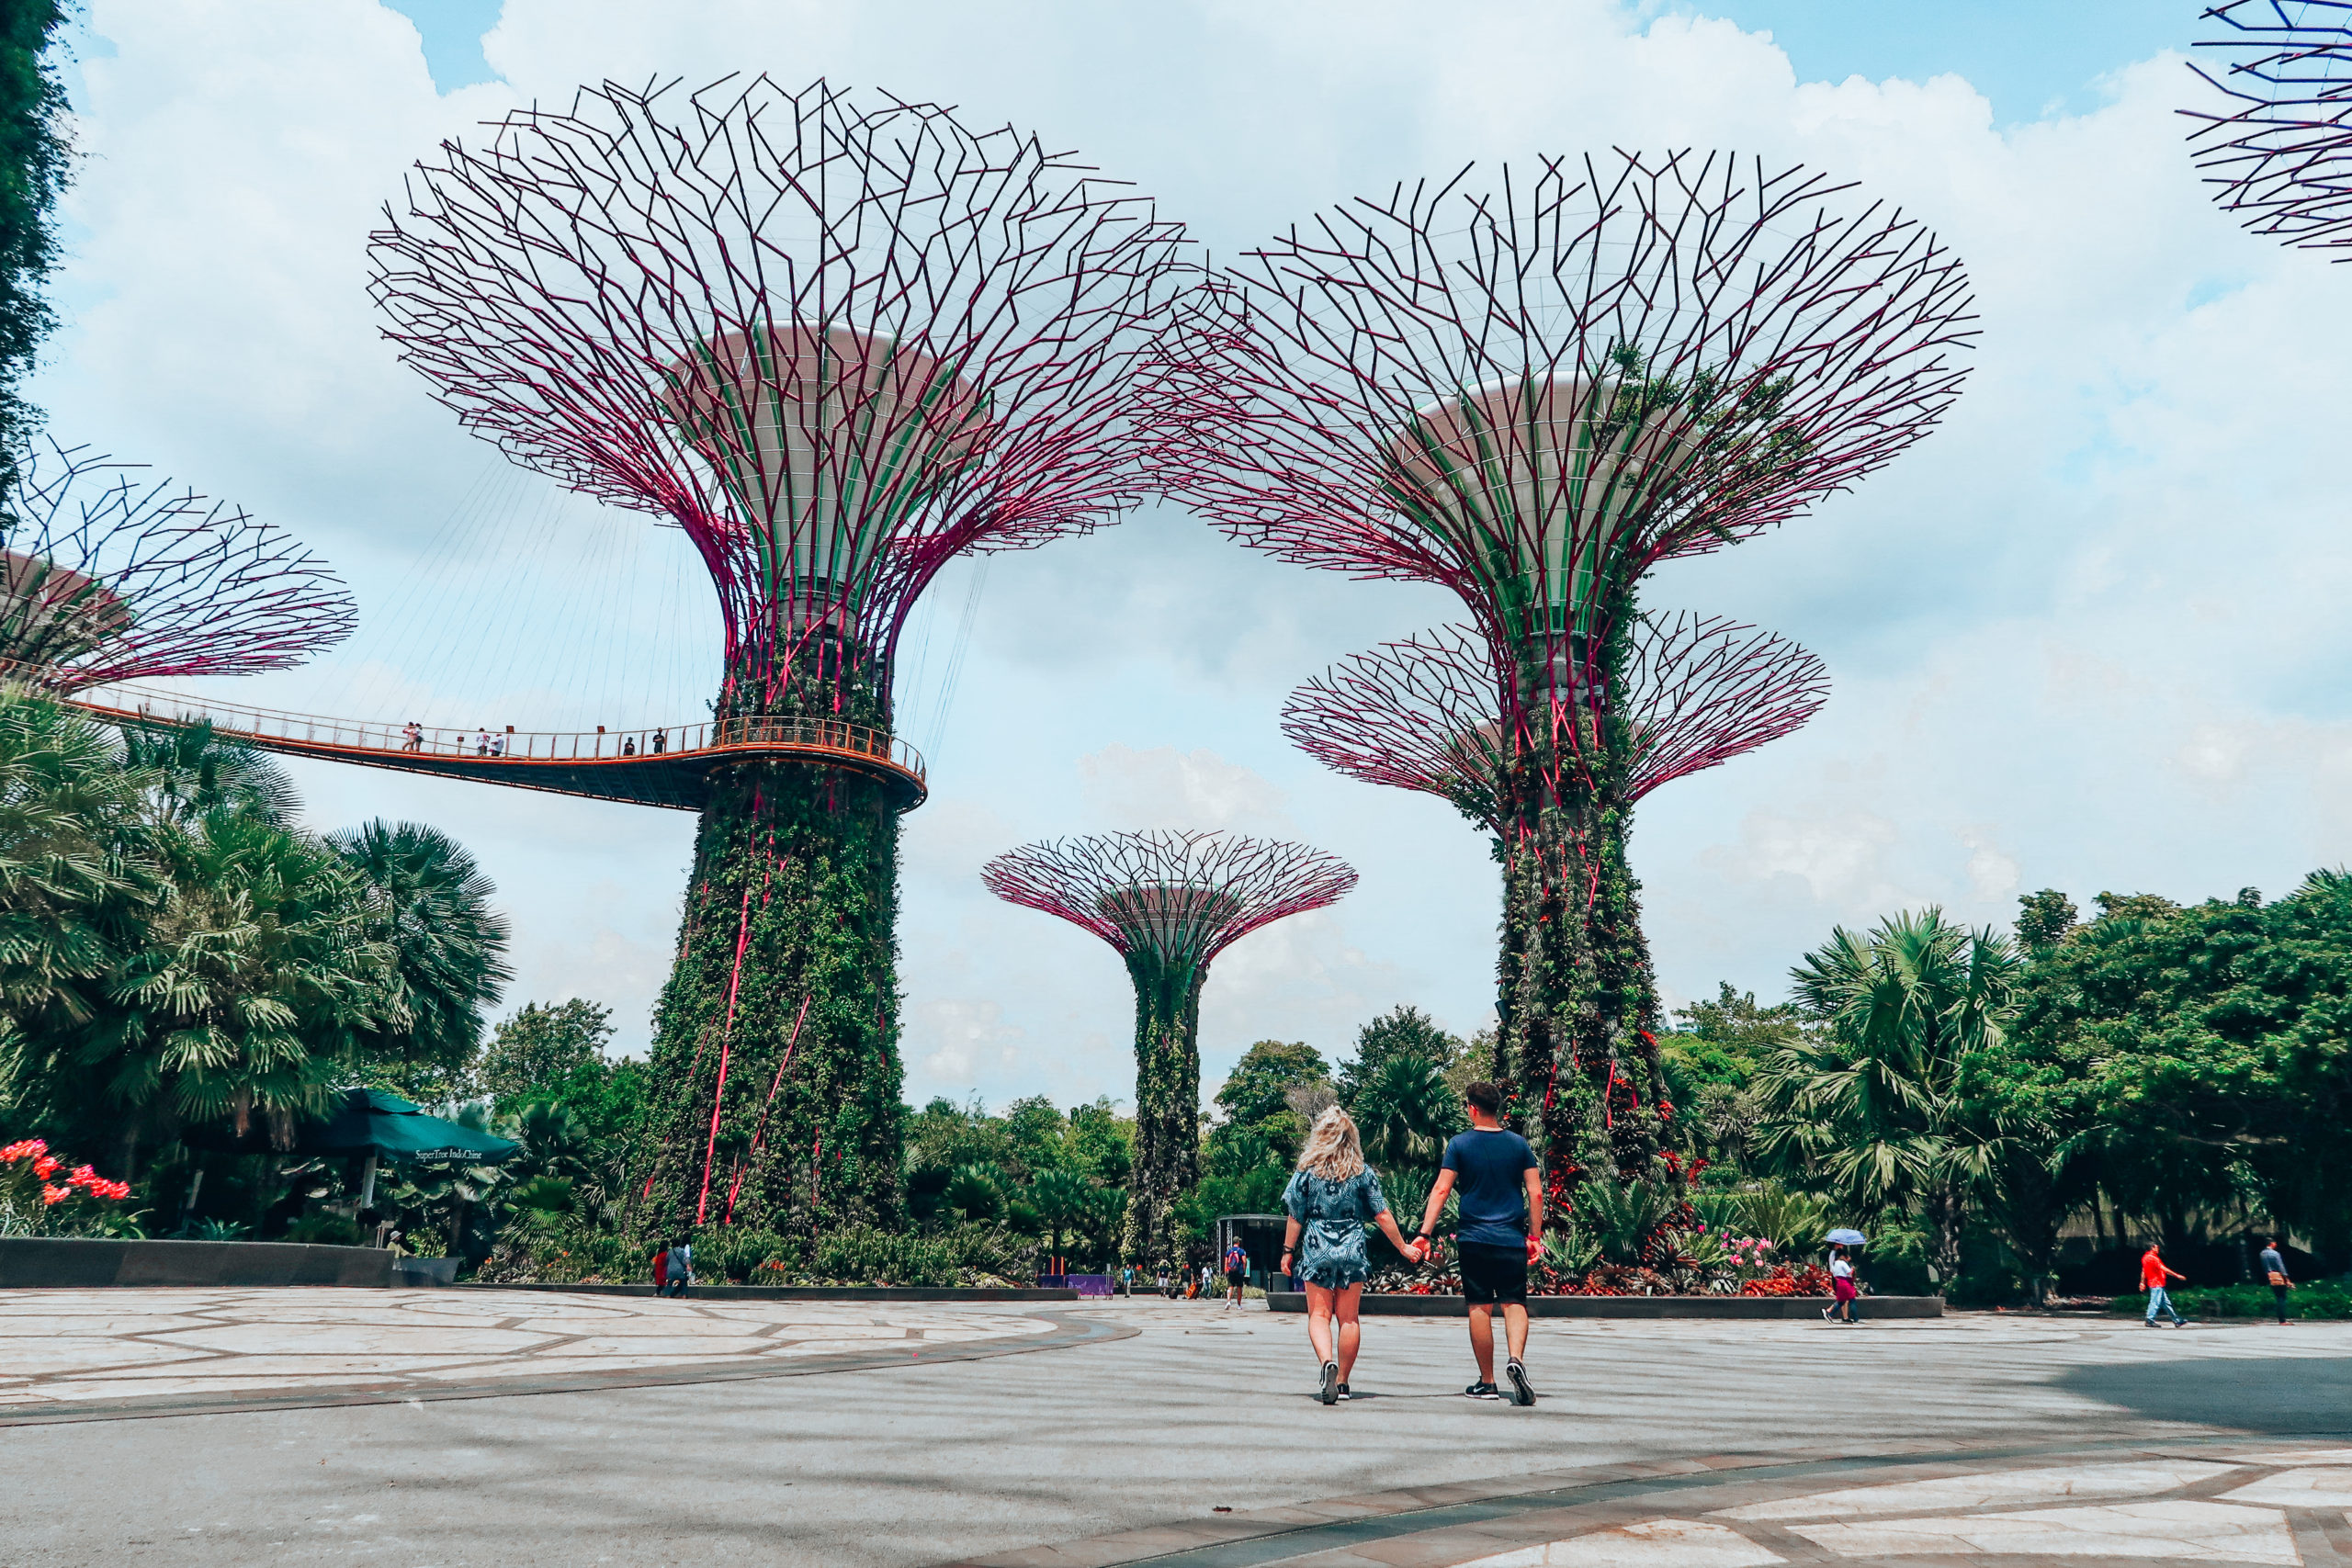 Visiting the Gardens by the Bay - Supertree Grove 